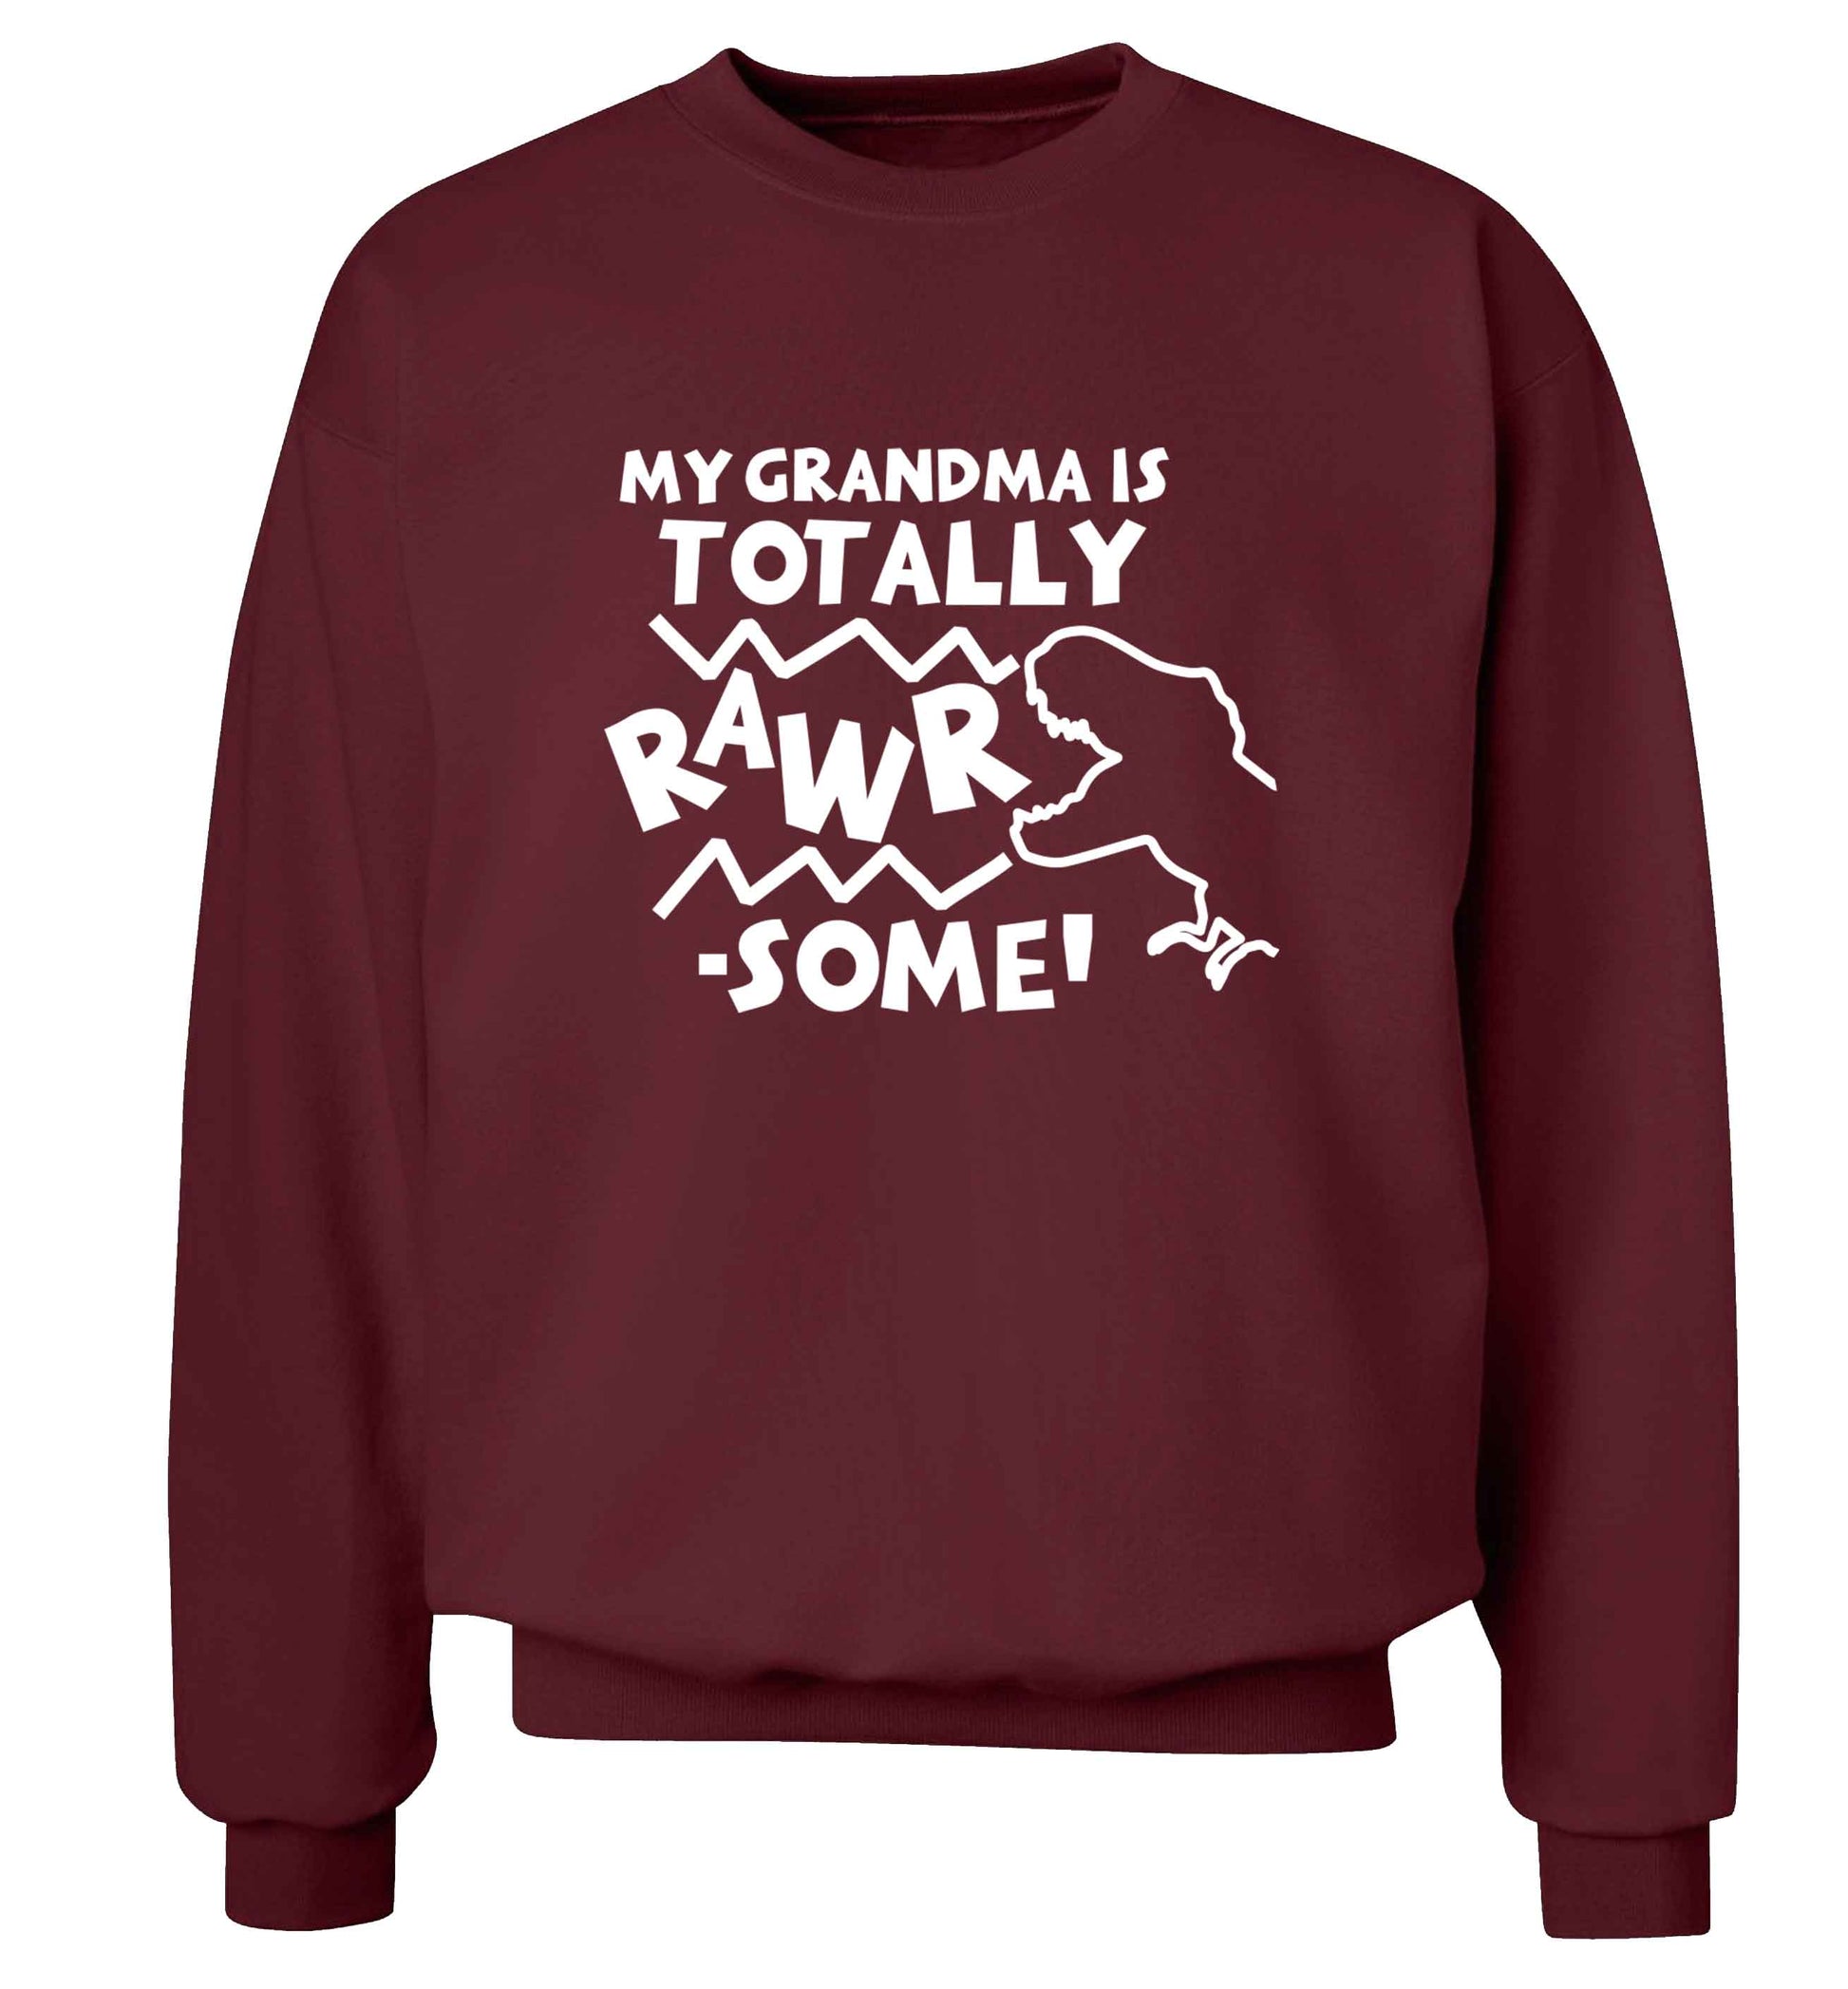 My grandma is totally rawrsome adult's unisex maroon sweater 2XL